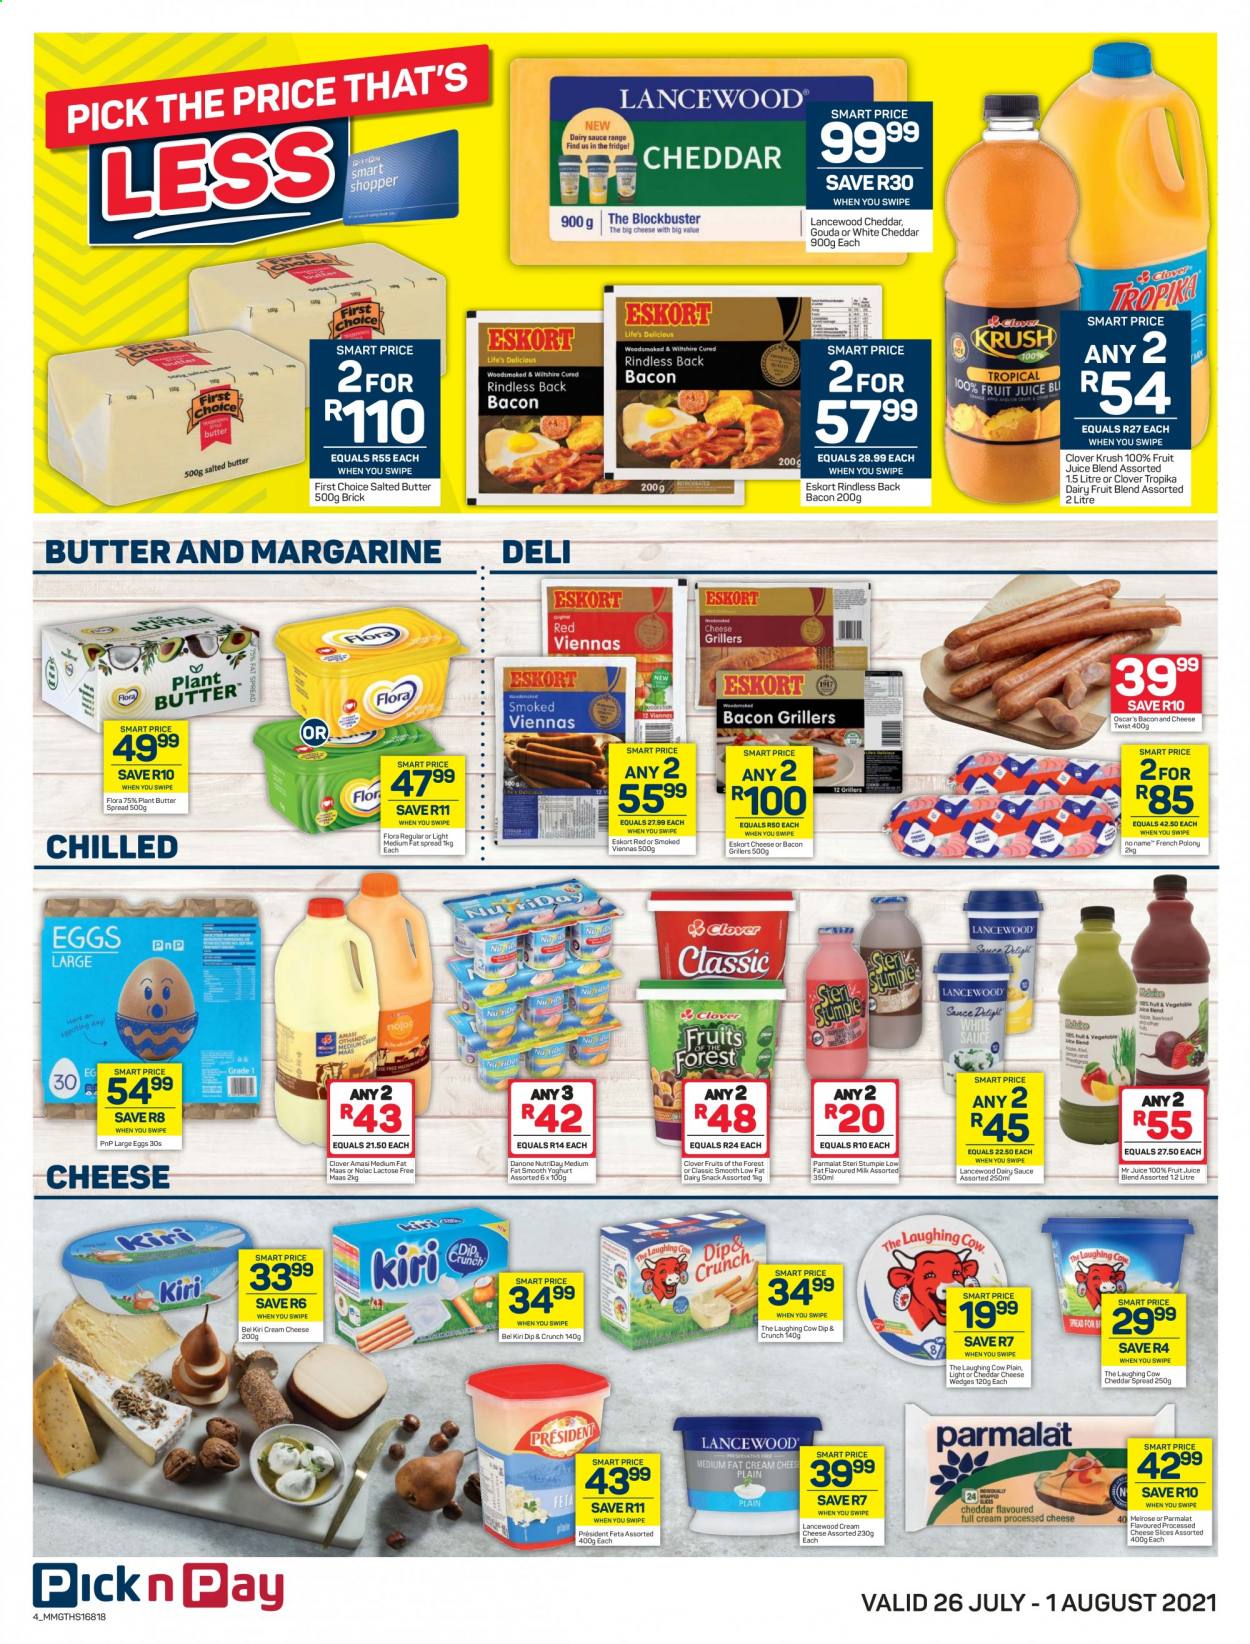 Pick n Pay specials - 07.26.2021 - 08.01.2021. 